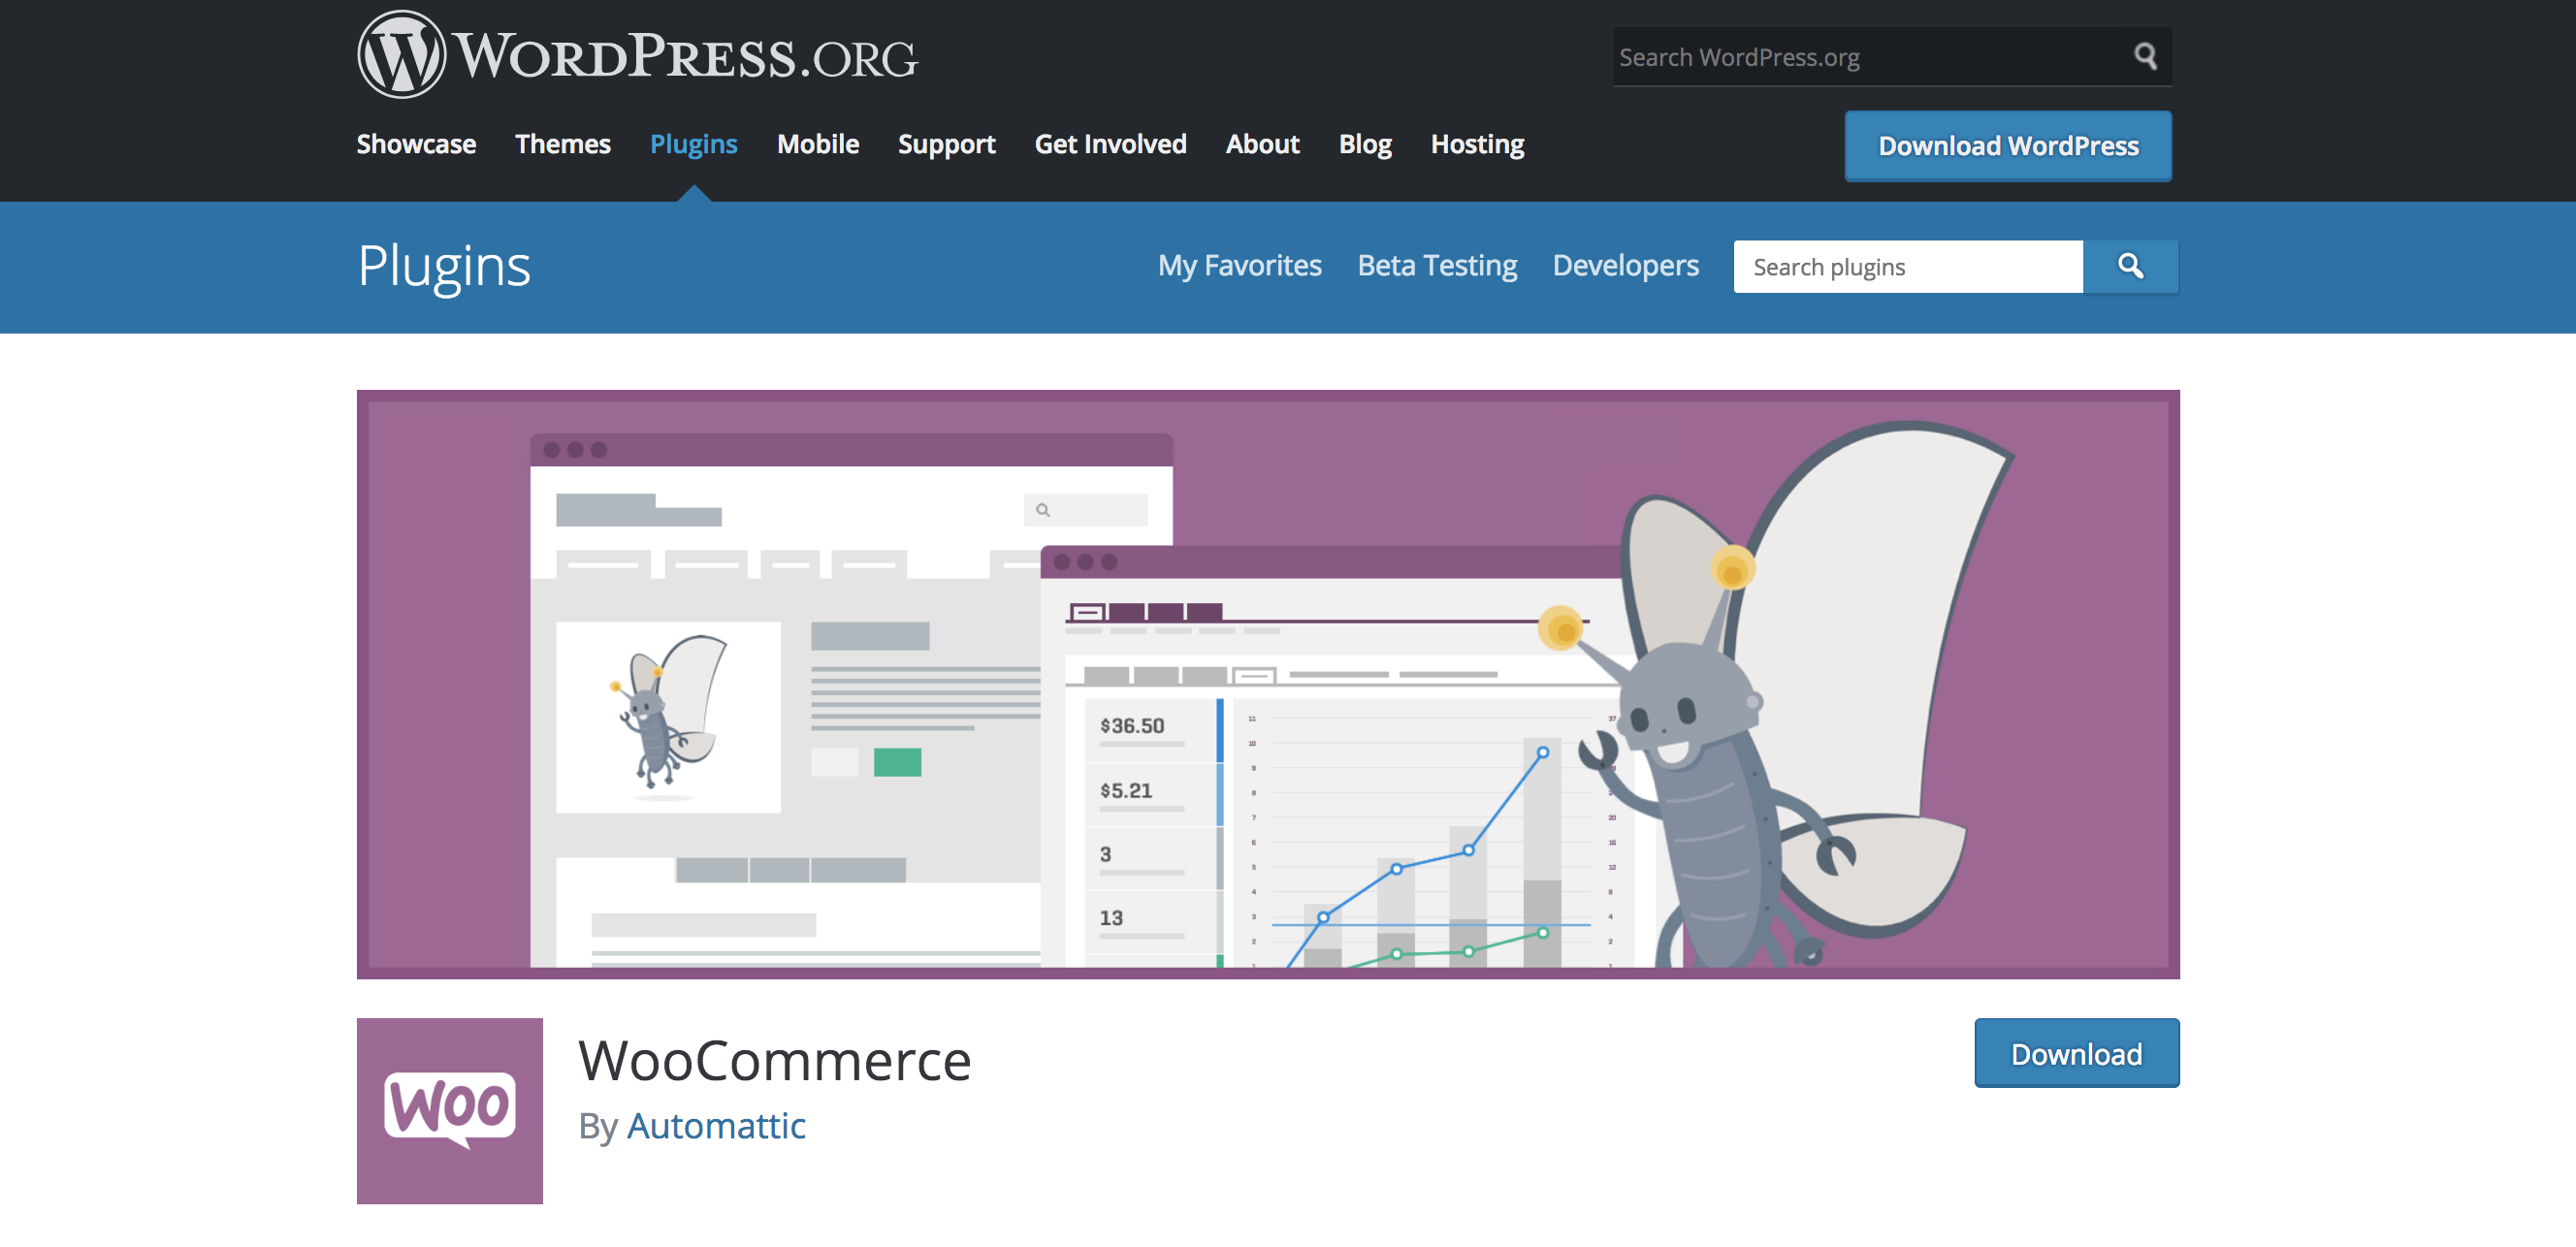 An introduction to WordPress and WooCommerce